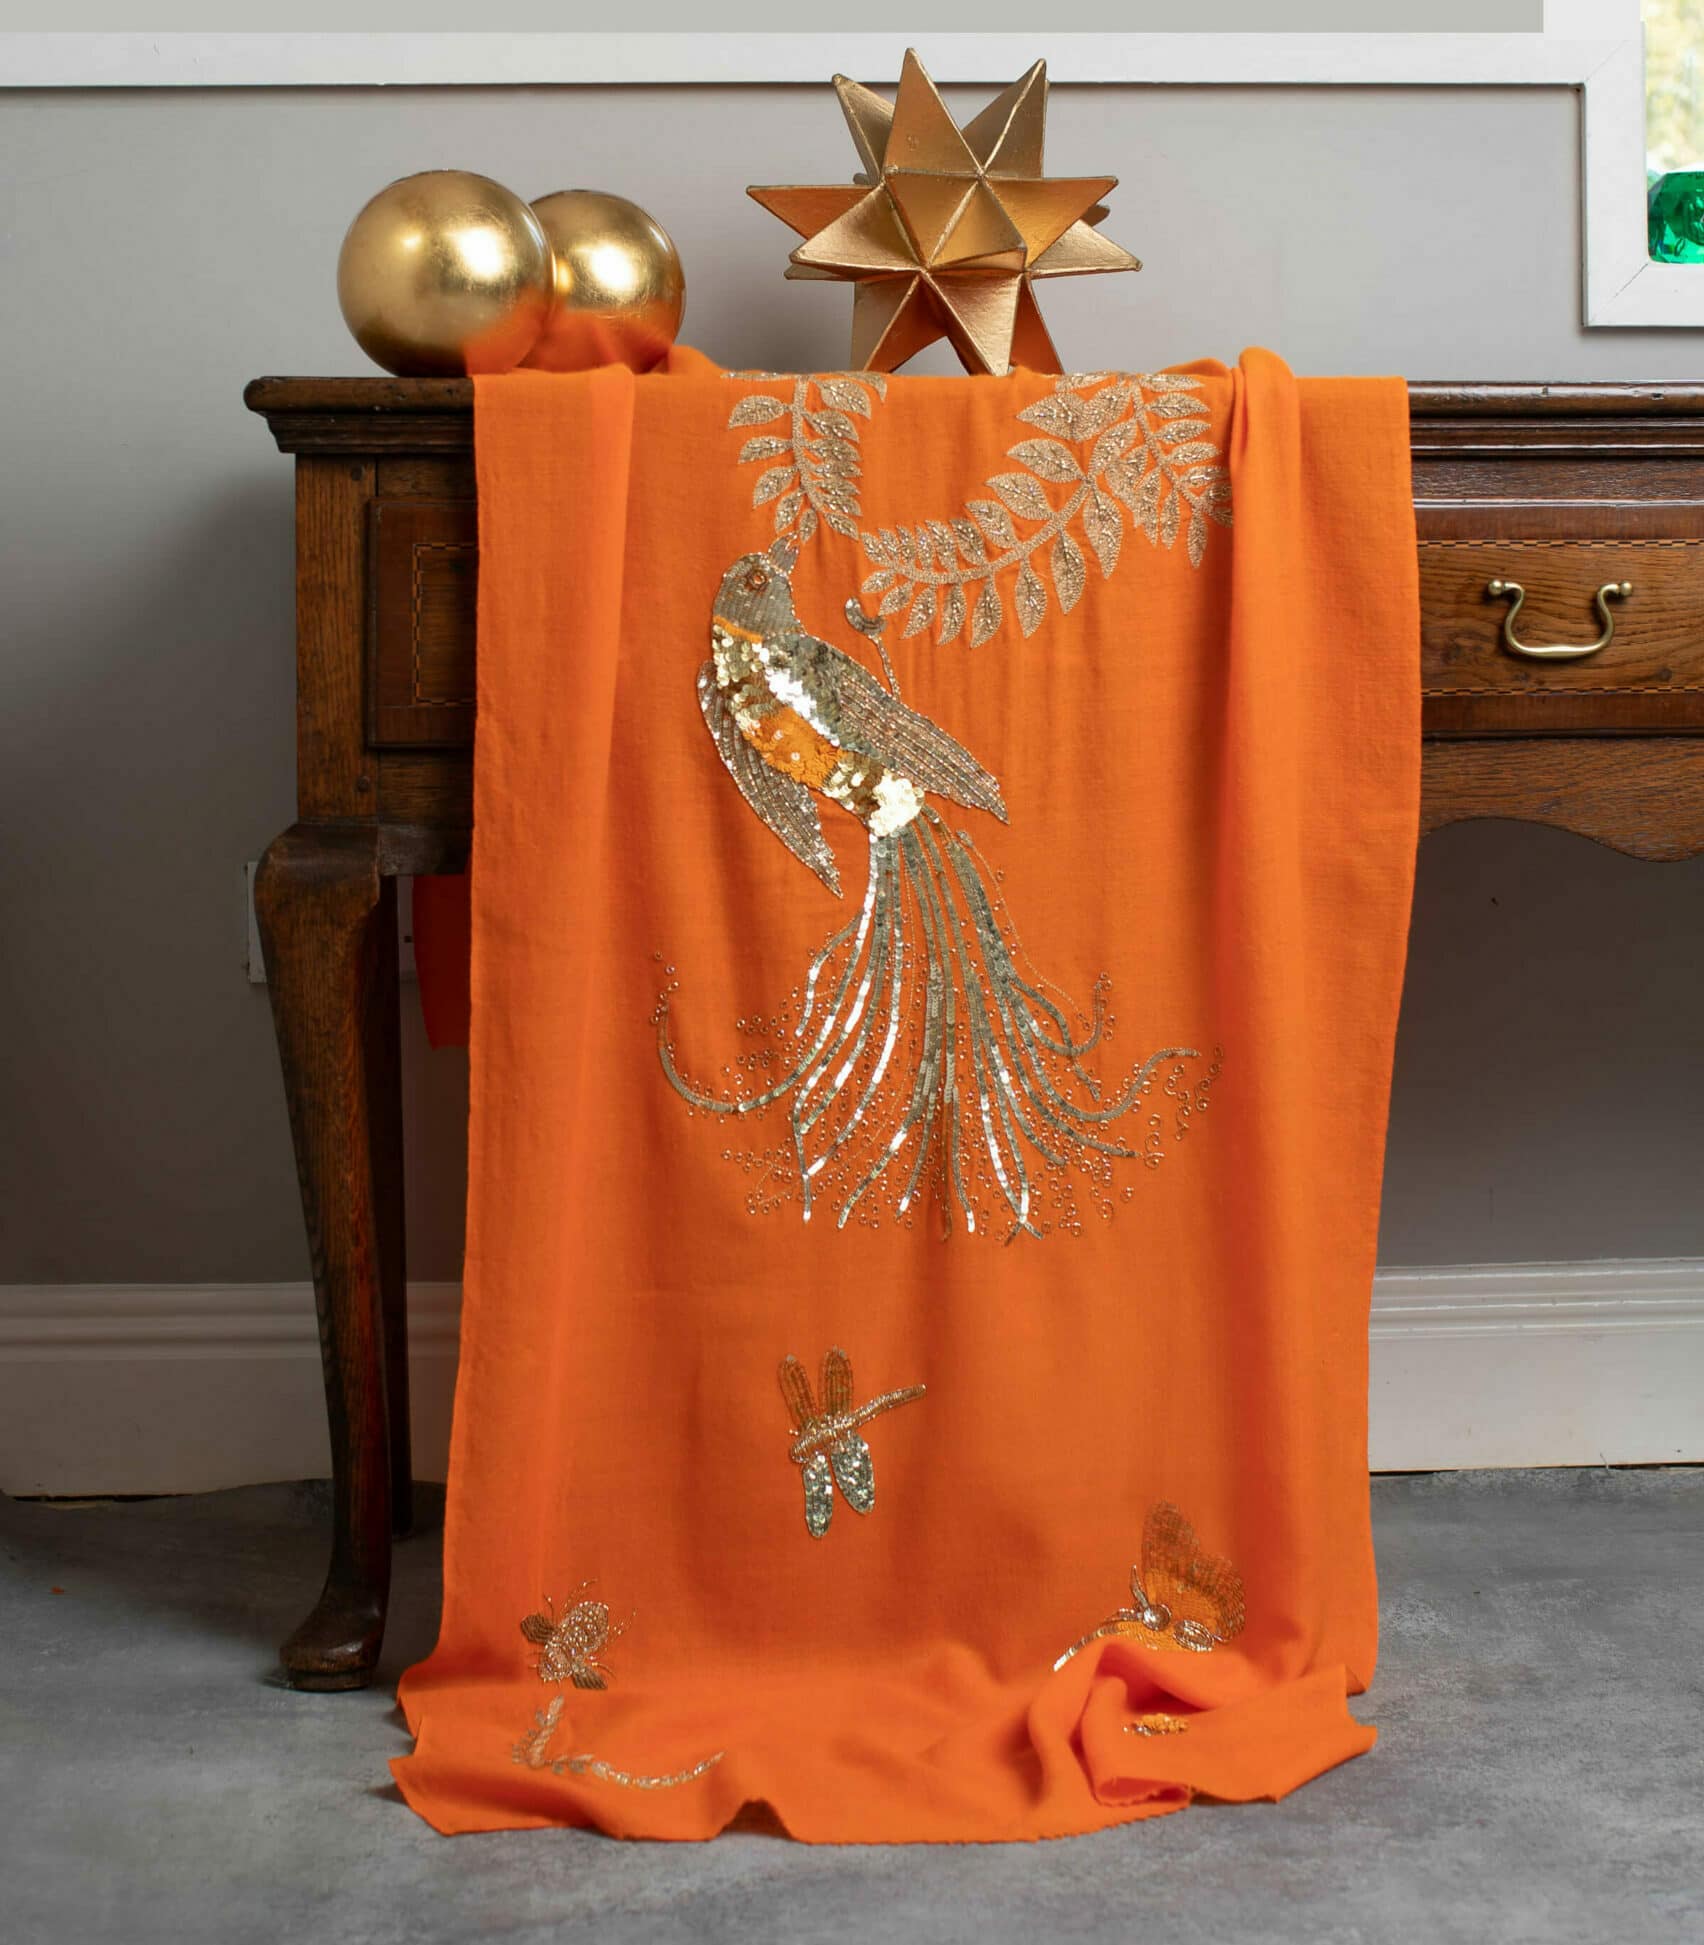 Embroidered gold cashmere scarf